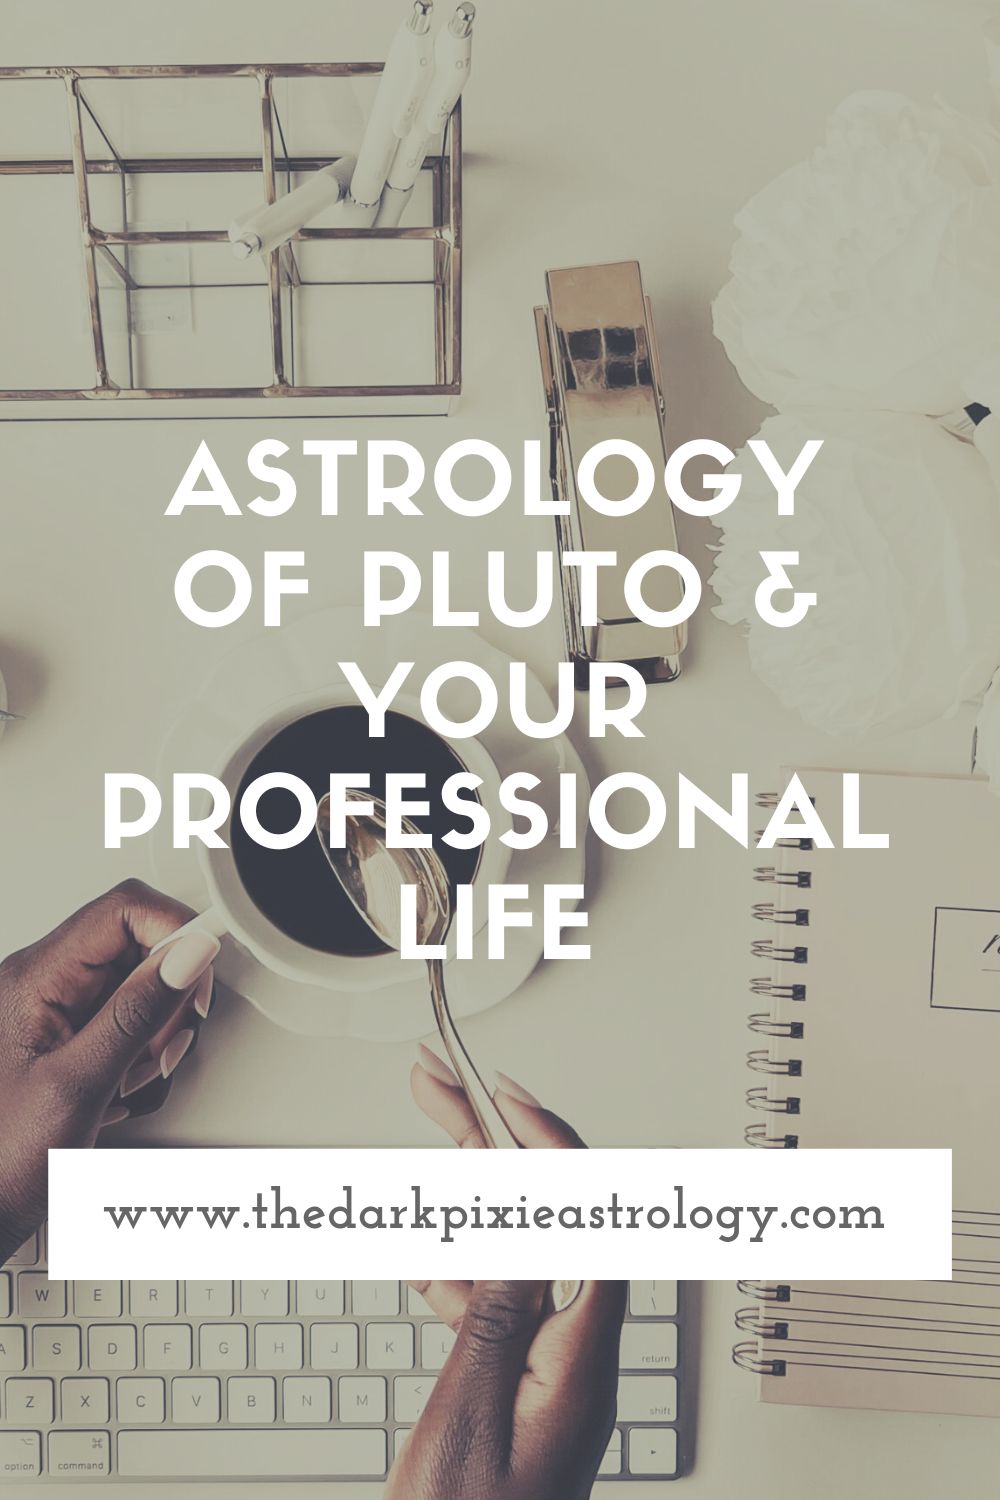 Astrology of Pluto & Your Professional Life - The Dark Pixie Astrology